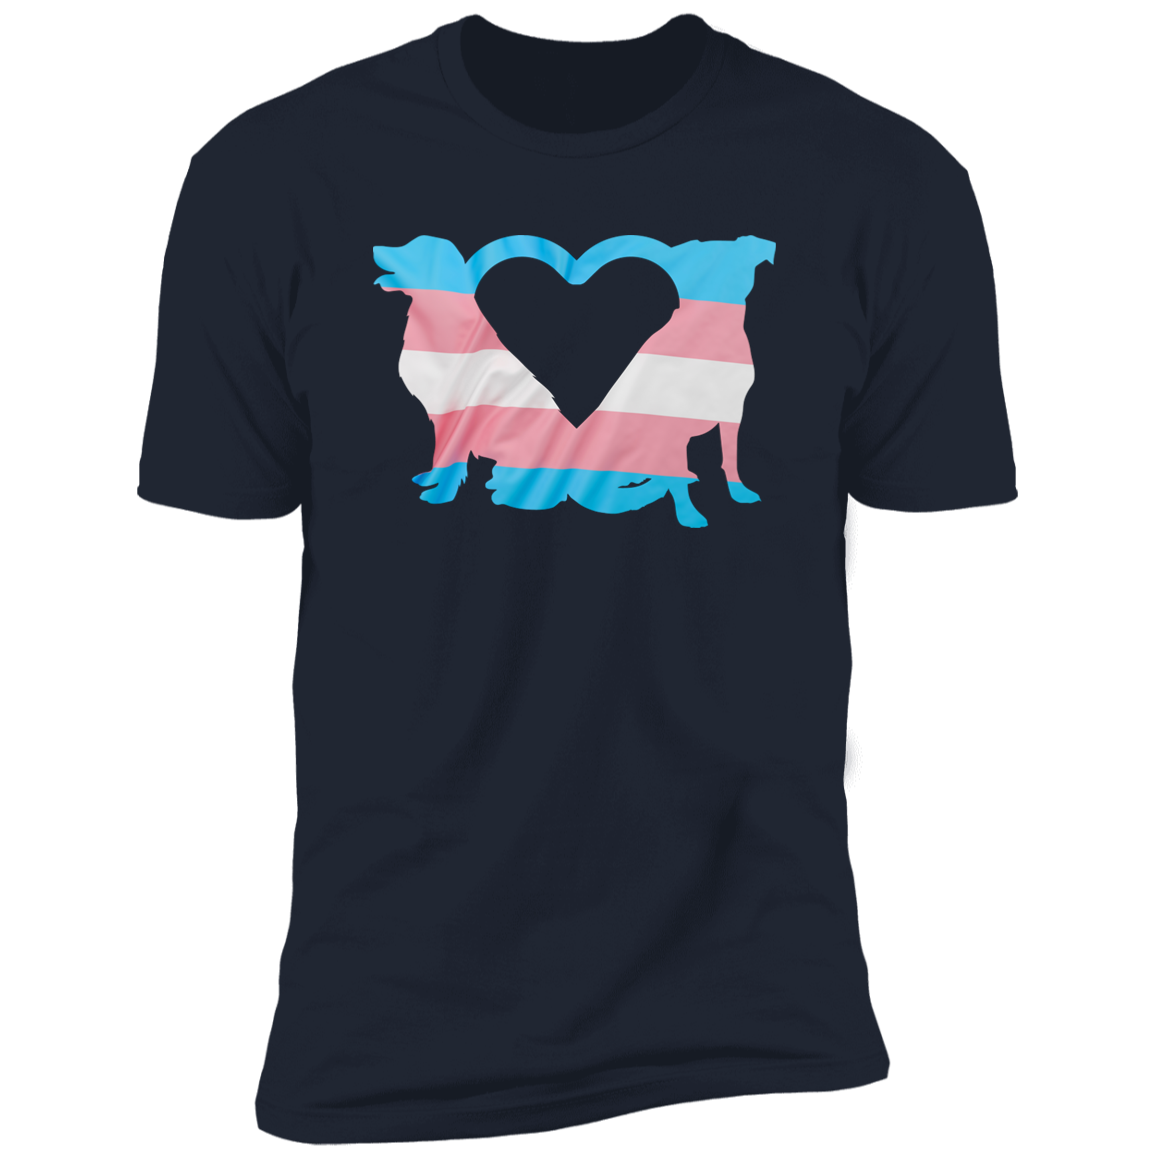 Trans Pride Dogs Heart Pride T-shirt, Trans Pride Dog Shirt for humans, in navy blue